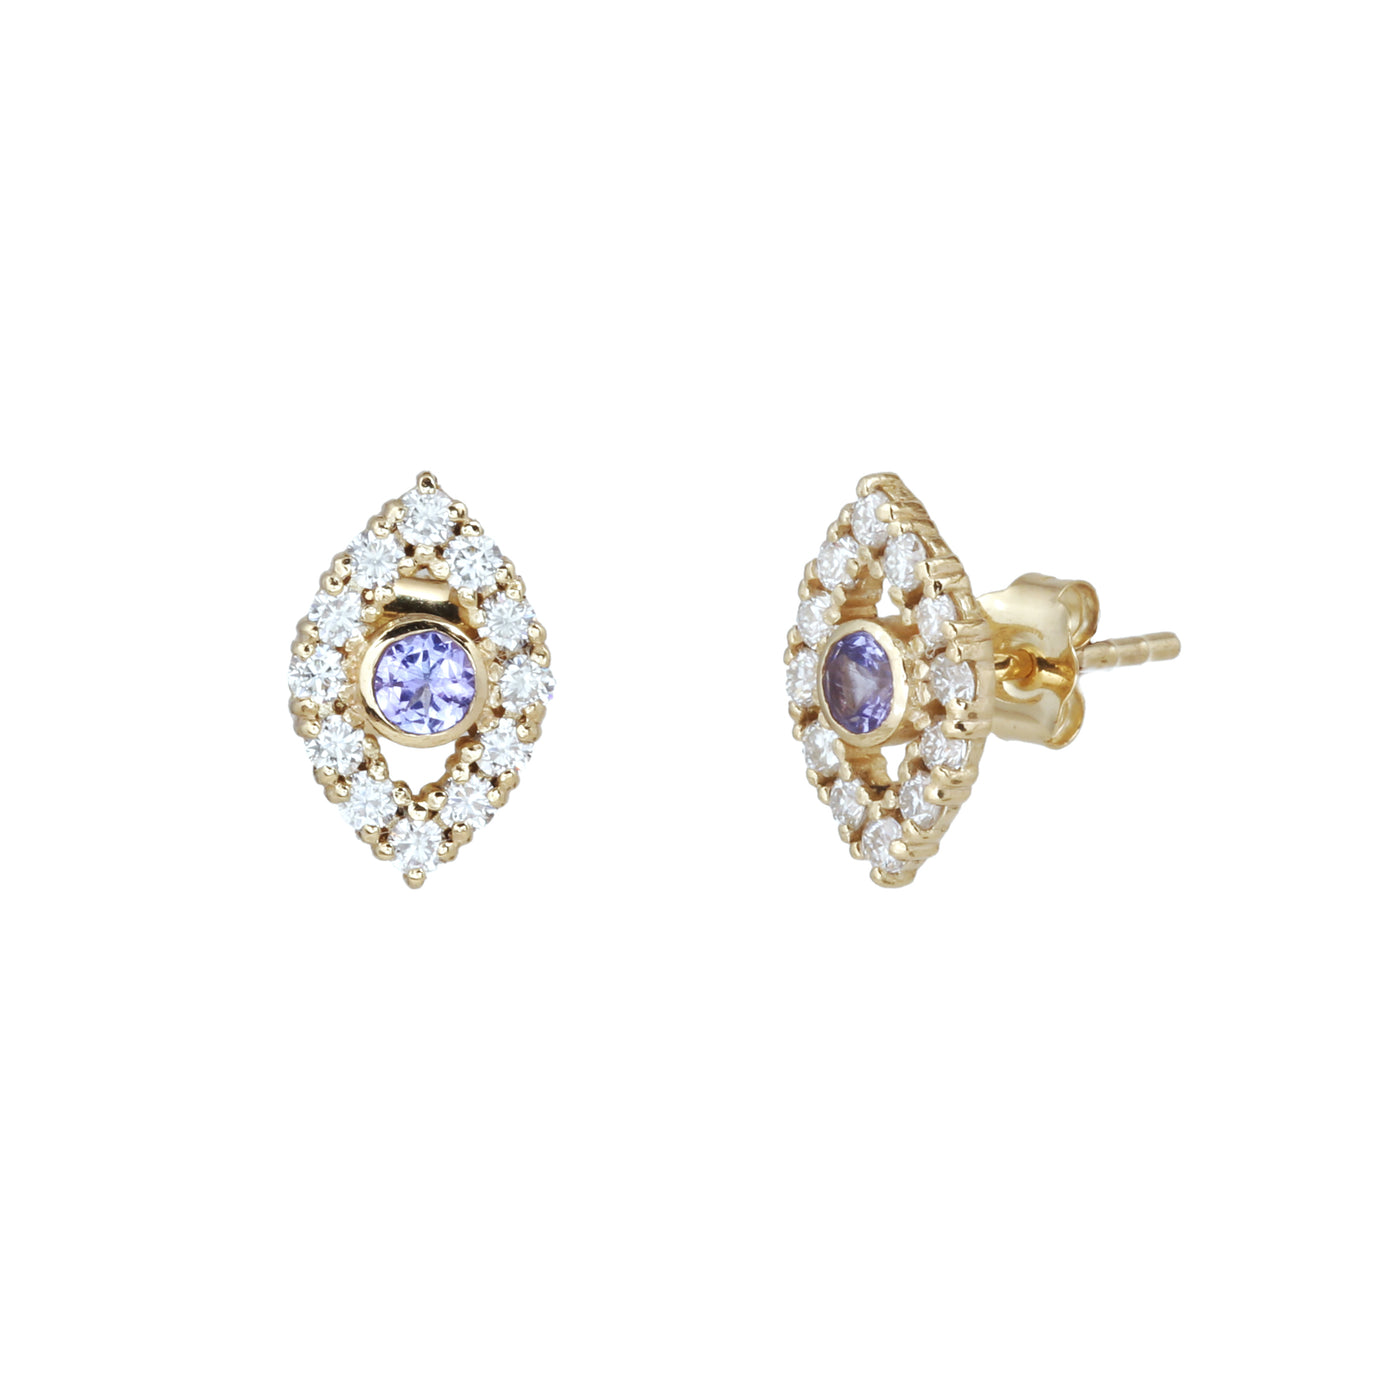 Naina evil eye studs in Tanzanite and studded with Moissanite